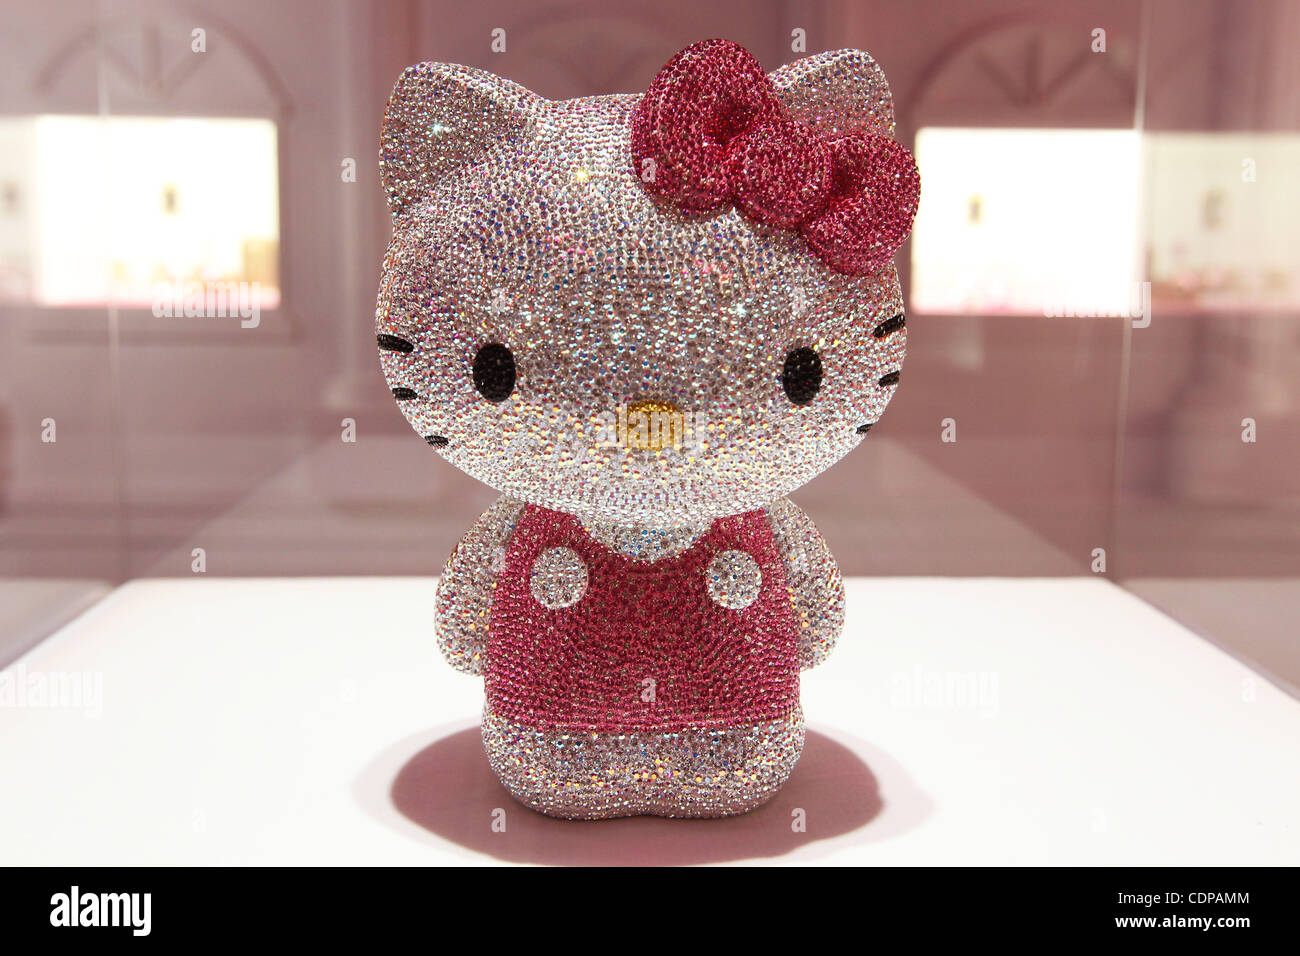 June 29, 2011 - Tokyo, Japan - Hello Kitty objects made by 20,000 Swarovski  elements are on display during an event 'Swarovski Presents 'House o Kitty''  at Omotesando Hill. The collection includes